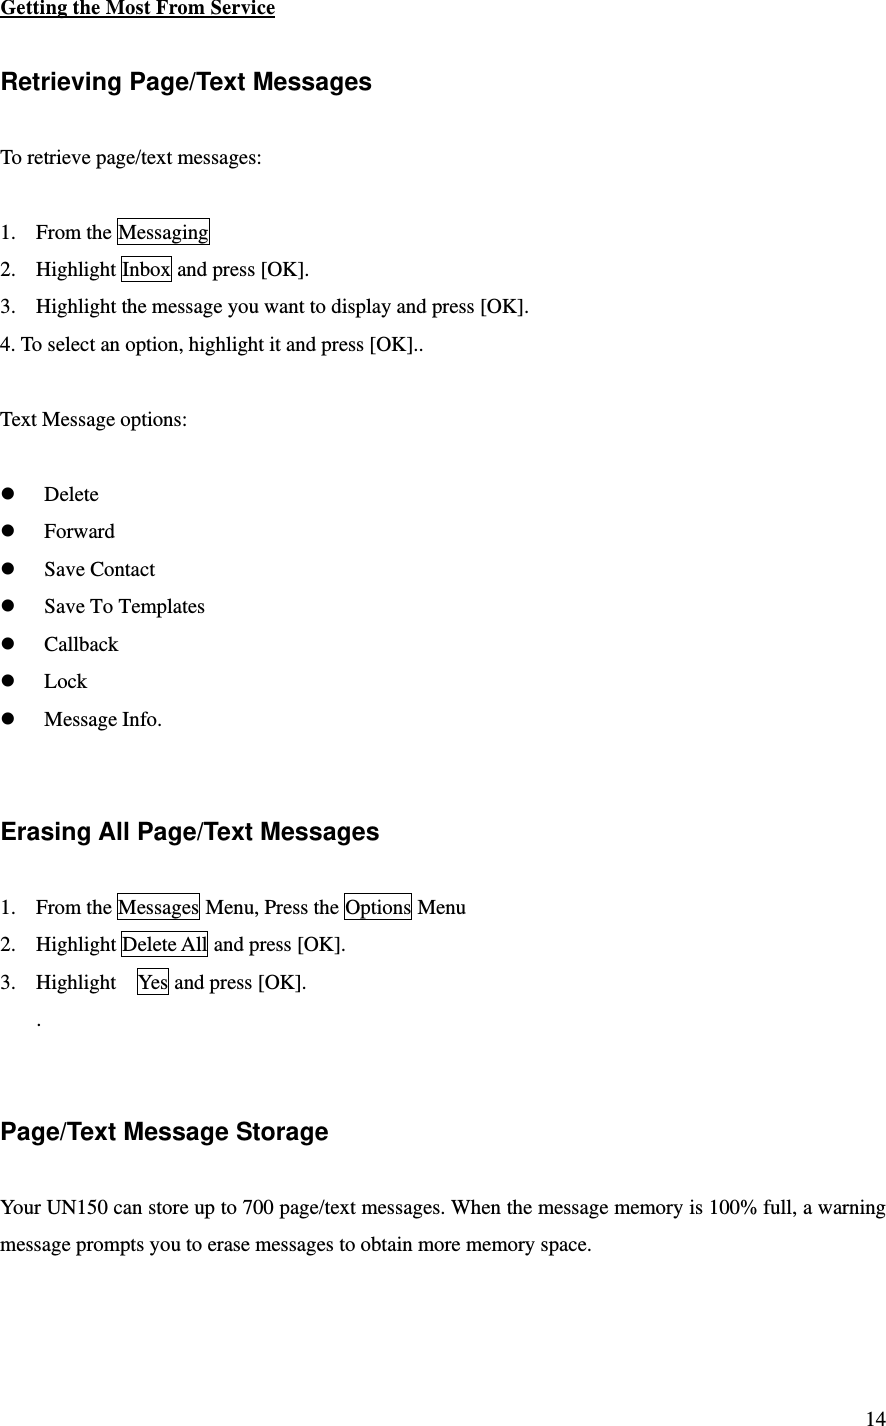 14 Getting the Most From Service  Retrieving Page/Text Messages  To retrieve page/text messages:  1. From the Messaging   2. Highlight Inbox and press [OK].   3. Highlight the message you want to display and press [OK].   4. To select an option, highlight it and press [OK]..  Text Message options:   Delete  Forward  Save Contact  Save To Templates  Callback  Lock  Message Info.   Erasing All Page/Text Messages  1. From the Messages Menu, Press the Options Menu 2. Highlight Delete All and press [OK]. 3. Highlight    Yes and press [OK]. .   Page/Text Message Storage  Your UN150 can store up to 700 page/text messages. When the message memory is 100% full, a warning message prompts you to erase messages to obtain more memory space.   